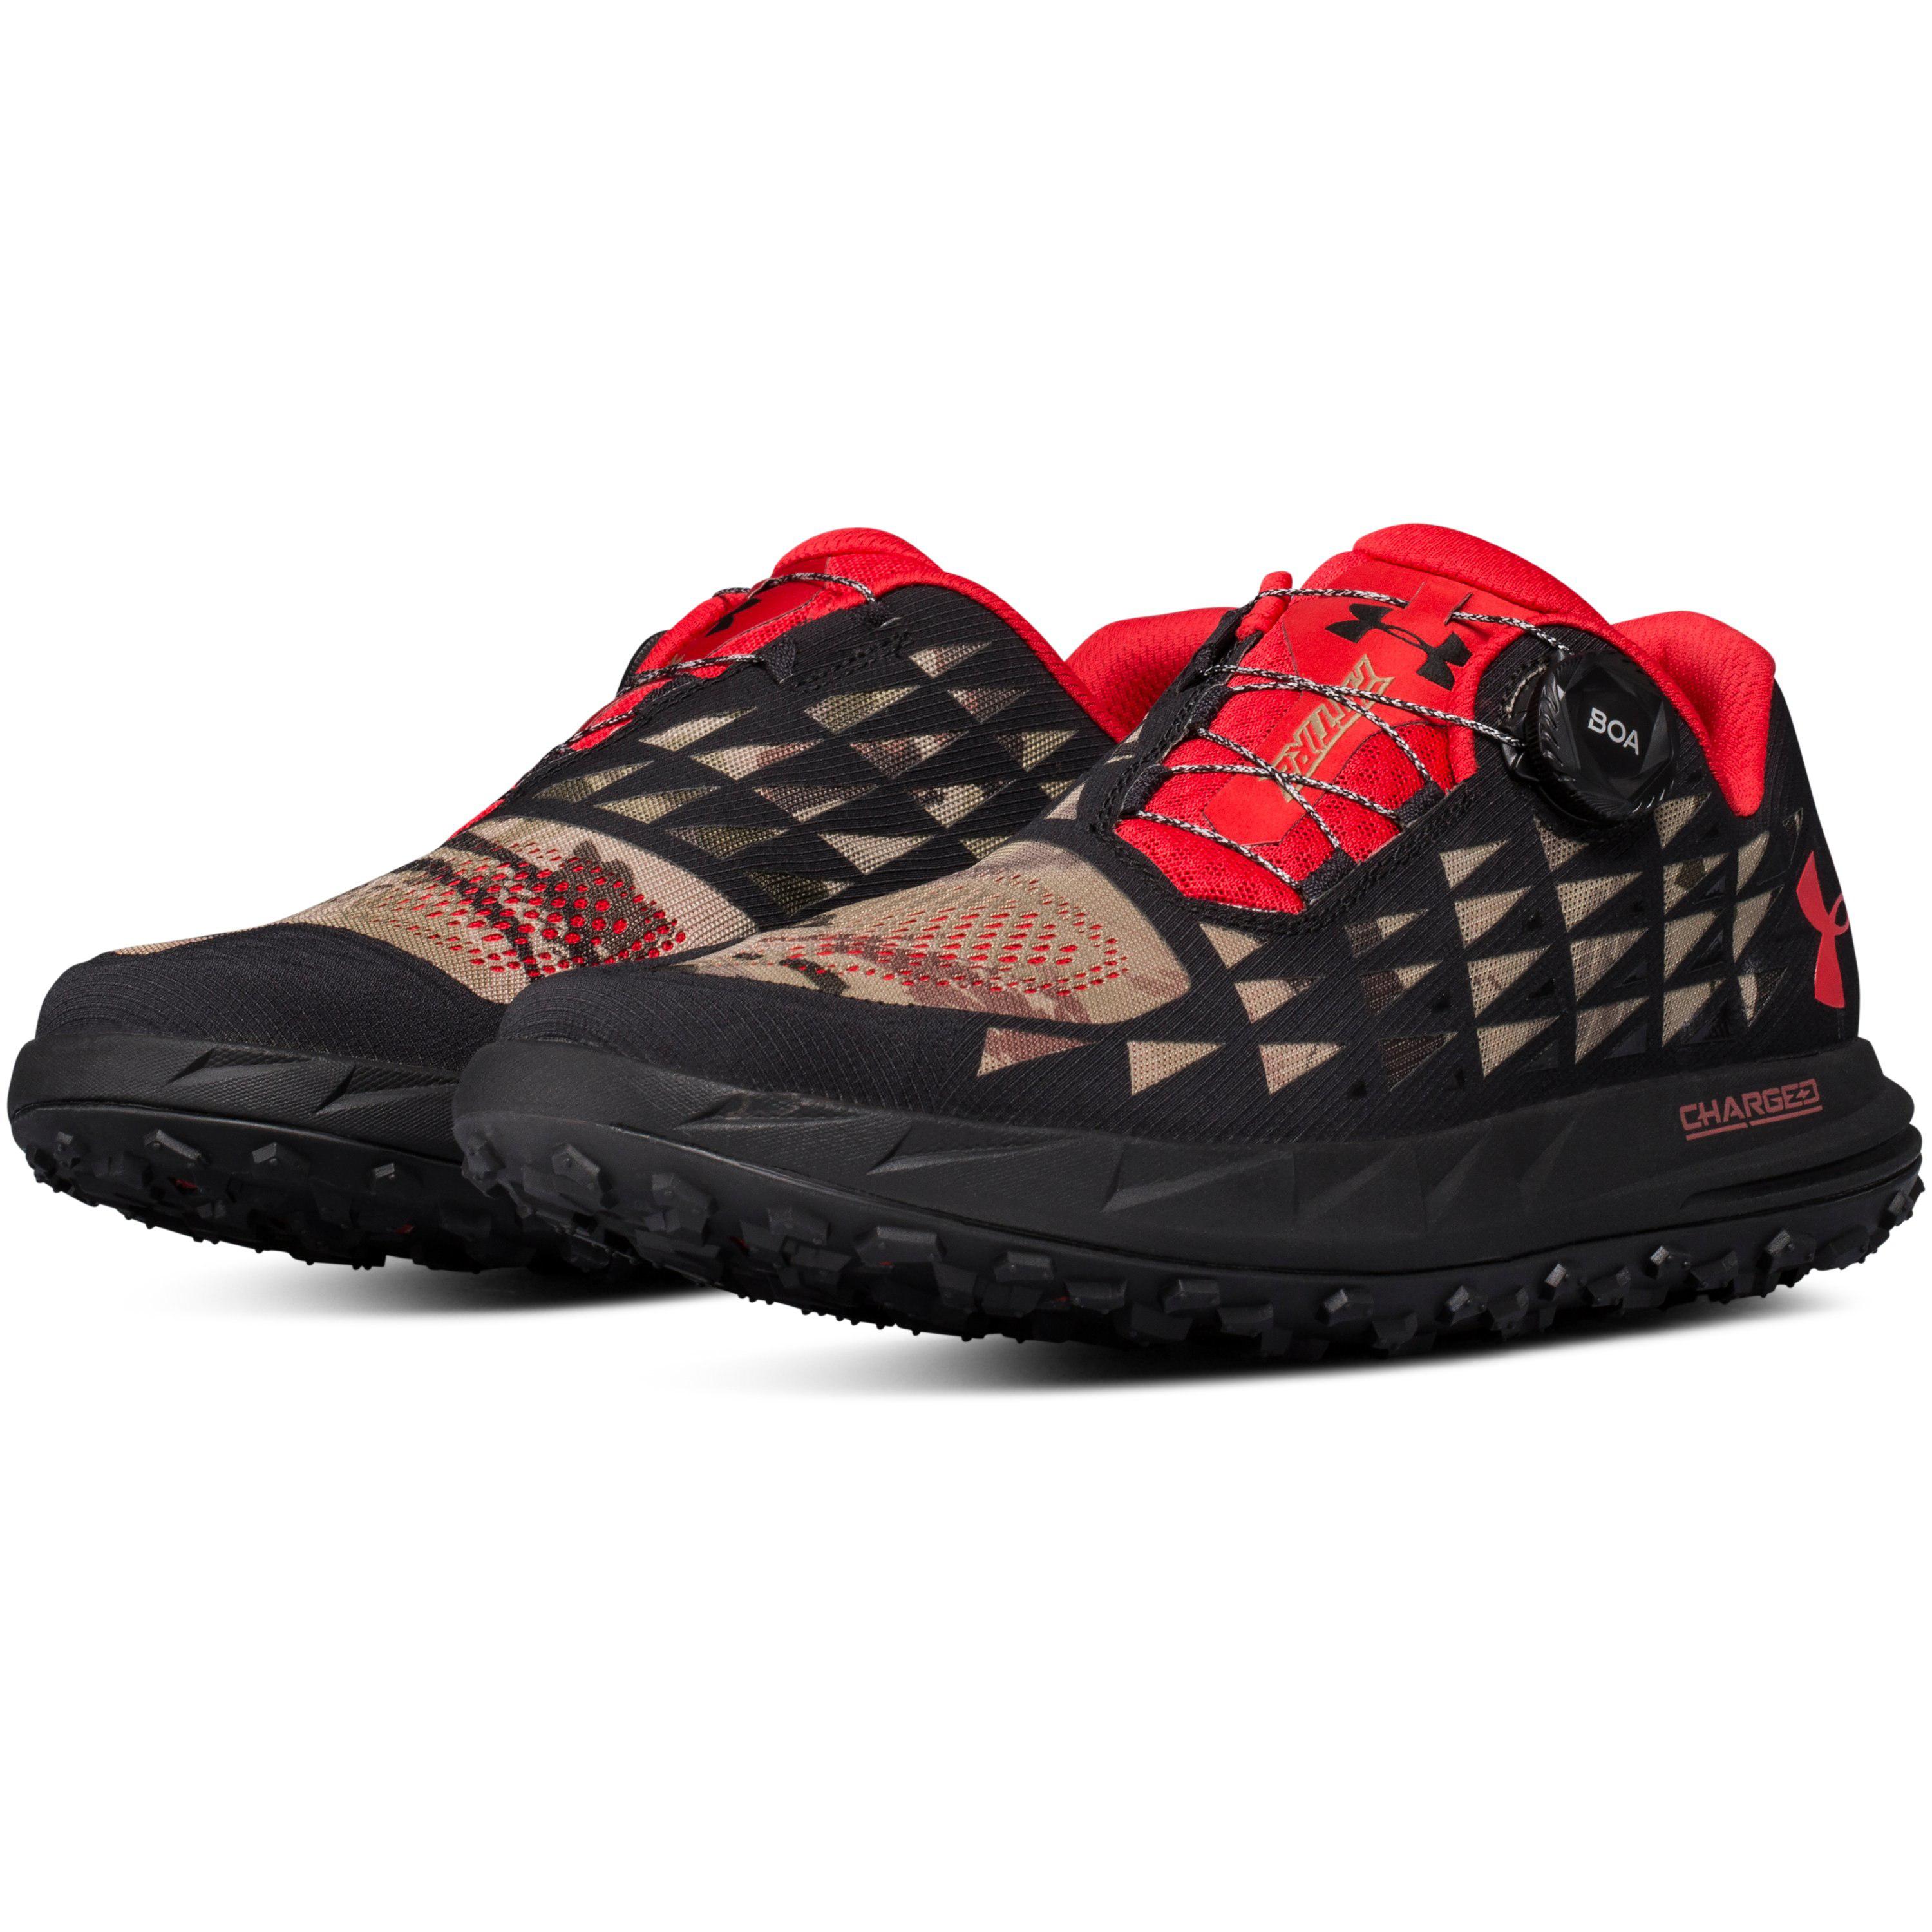 Fat Tire 3 Trail Running Shoes 